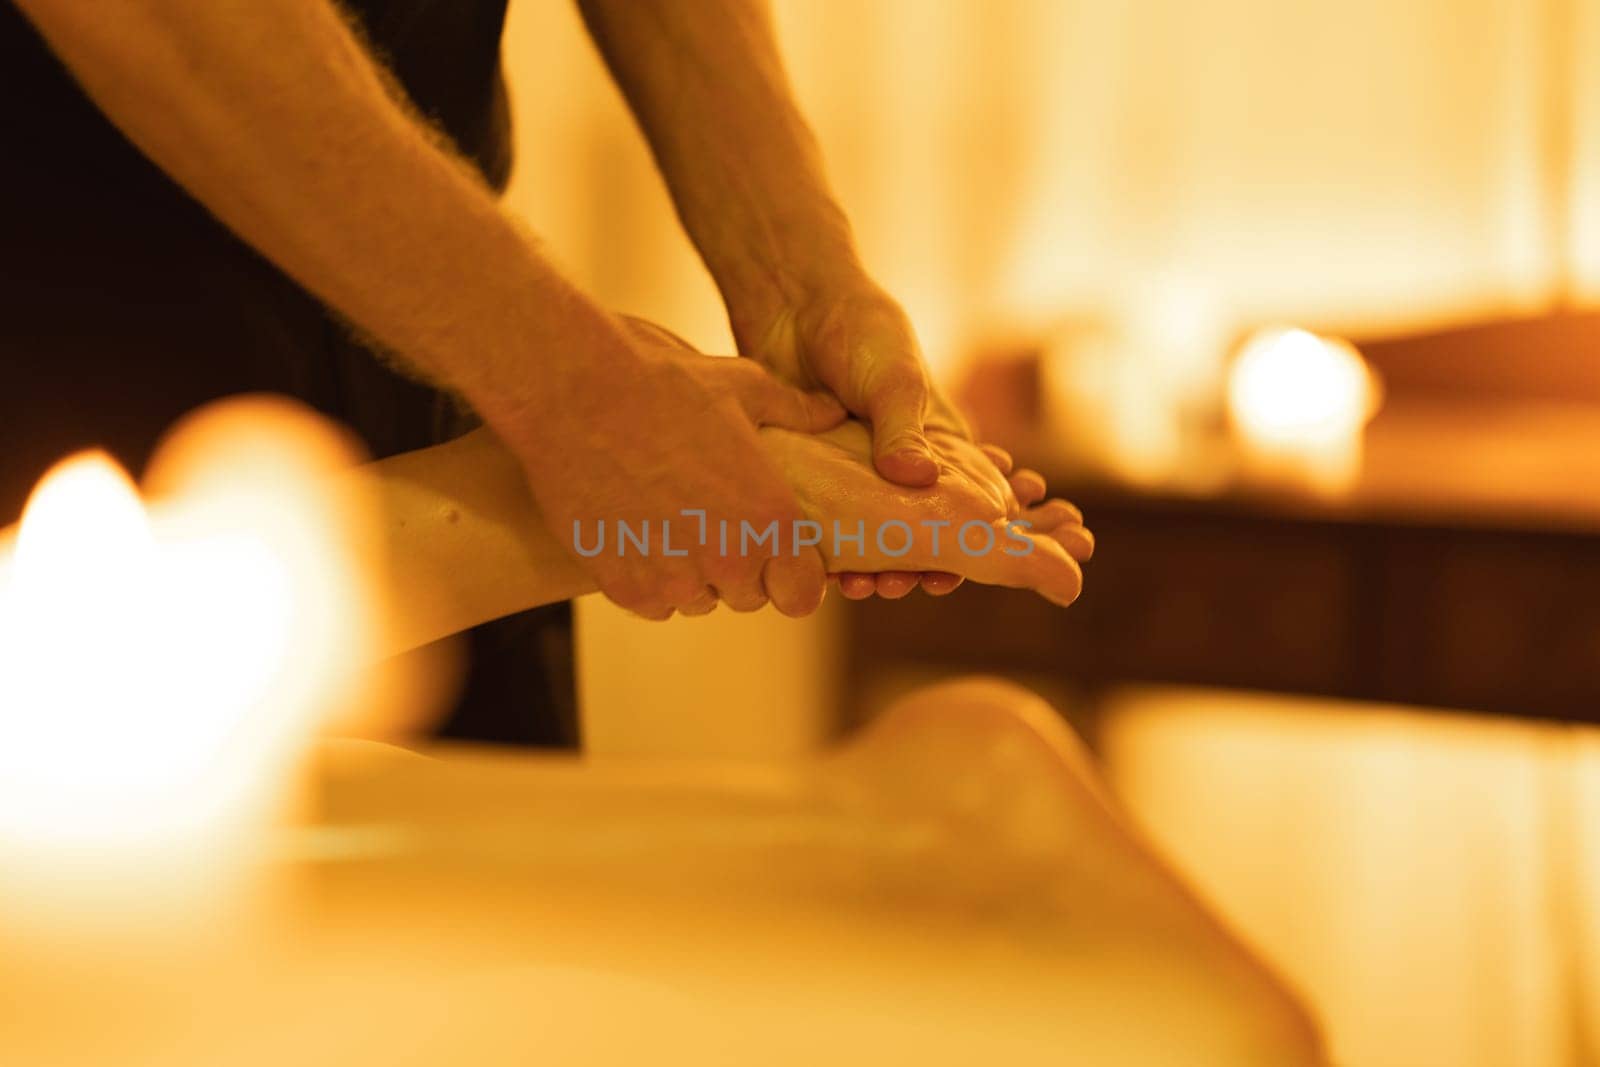 Massage in spa salon - massaging the foot of a woman client. Mid shot